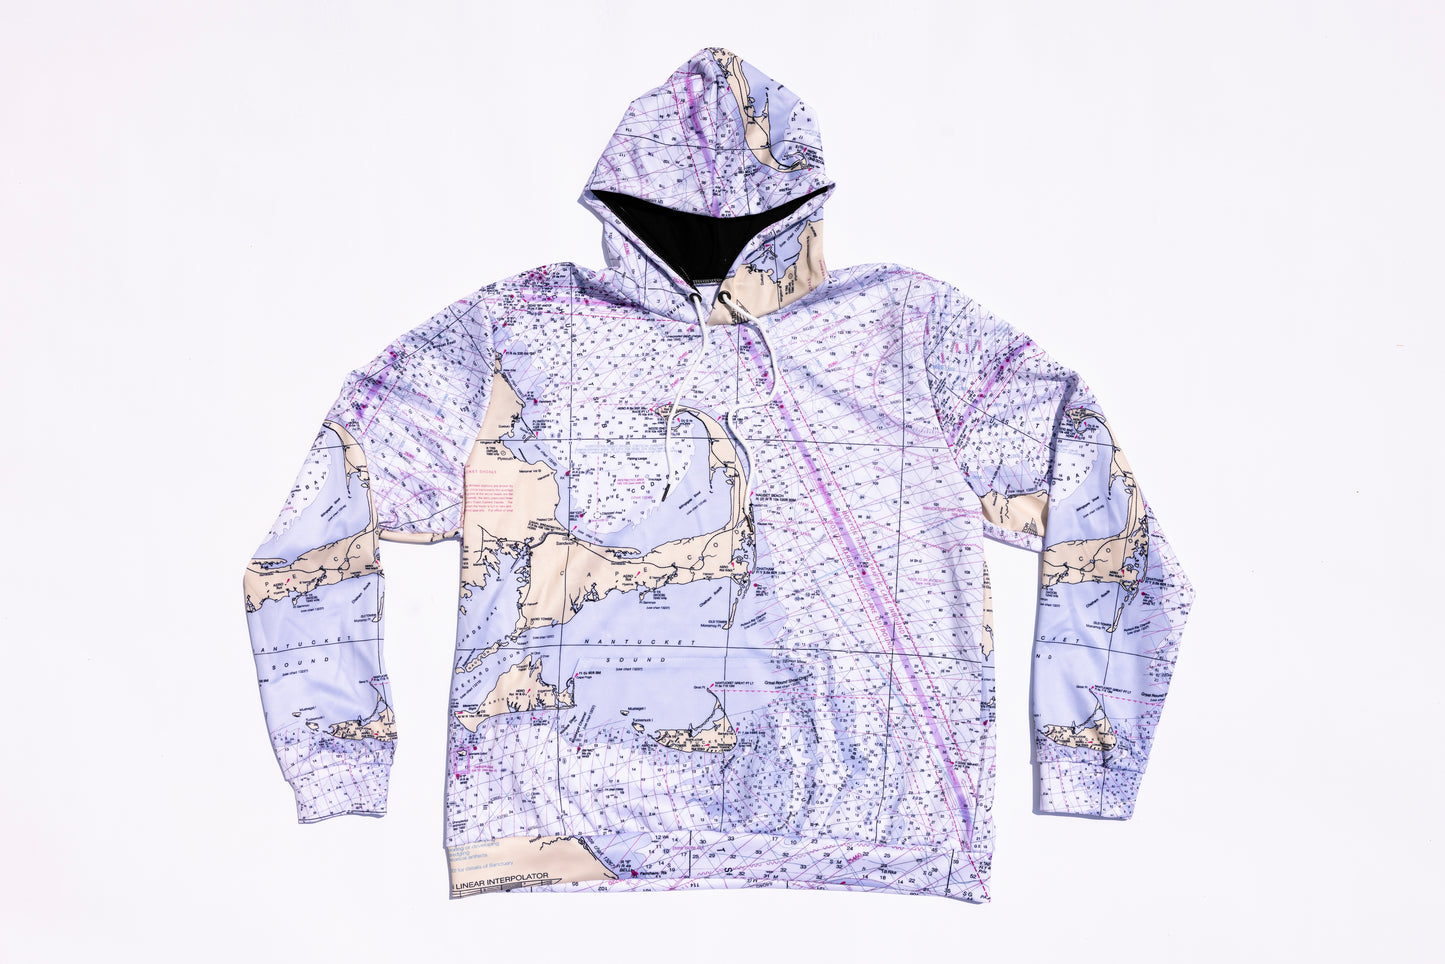 Intrinsic Provisions "Where the Hell are We?!?!" Sun Hoodies